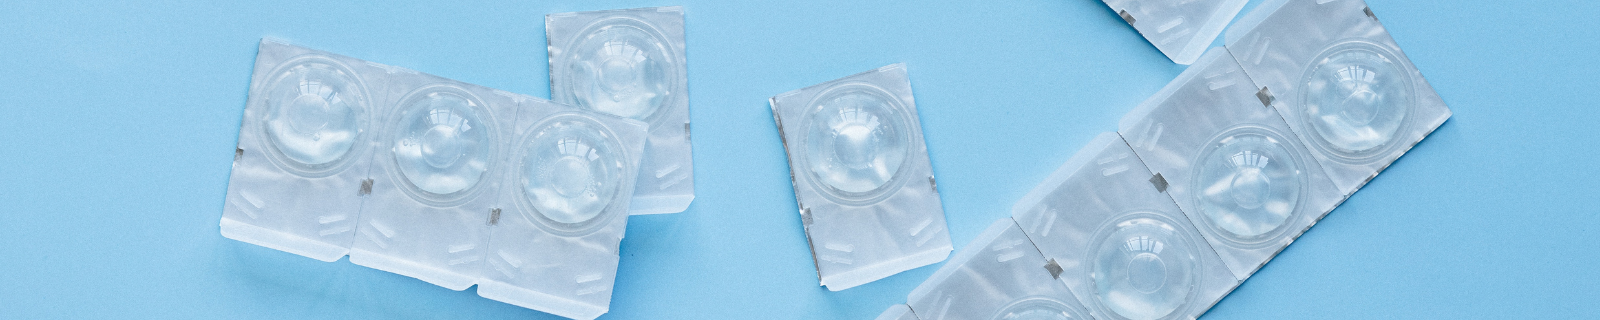 contact lenses in plastic packaging